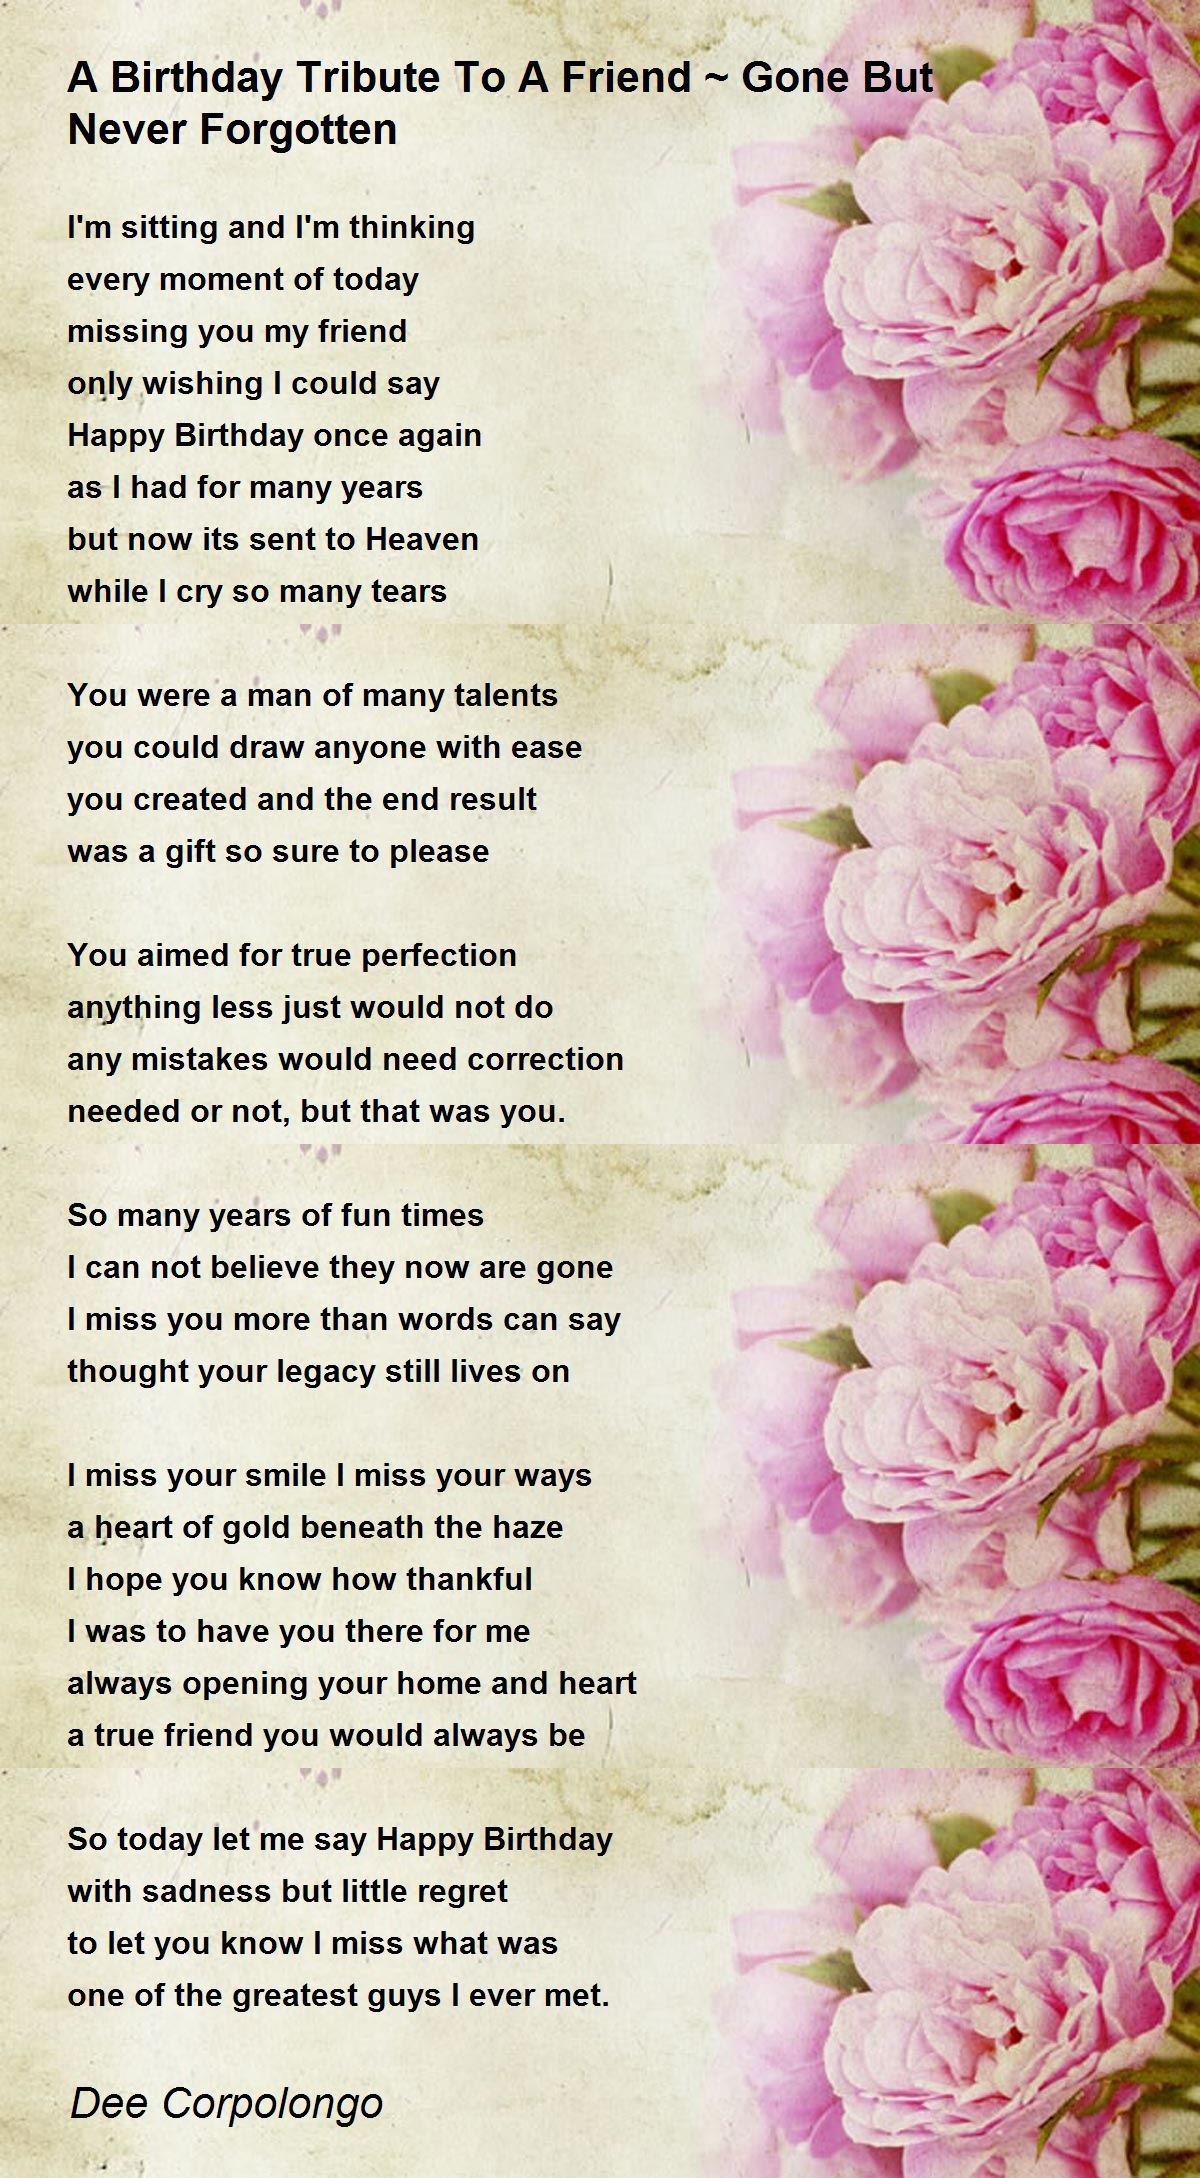 A Birthday Tribute To A Friend ~ Gone But Never Forgotten Poem by Dee